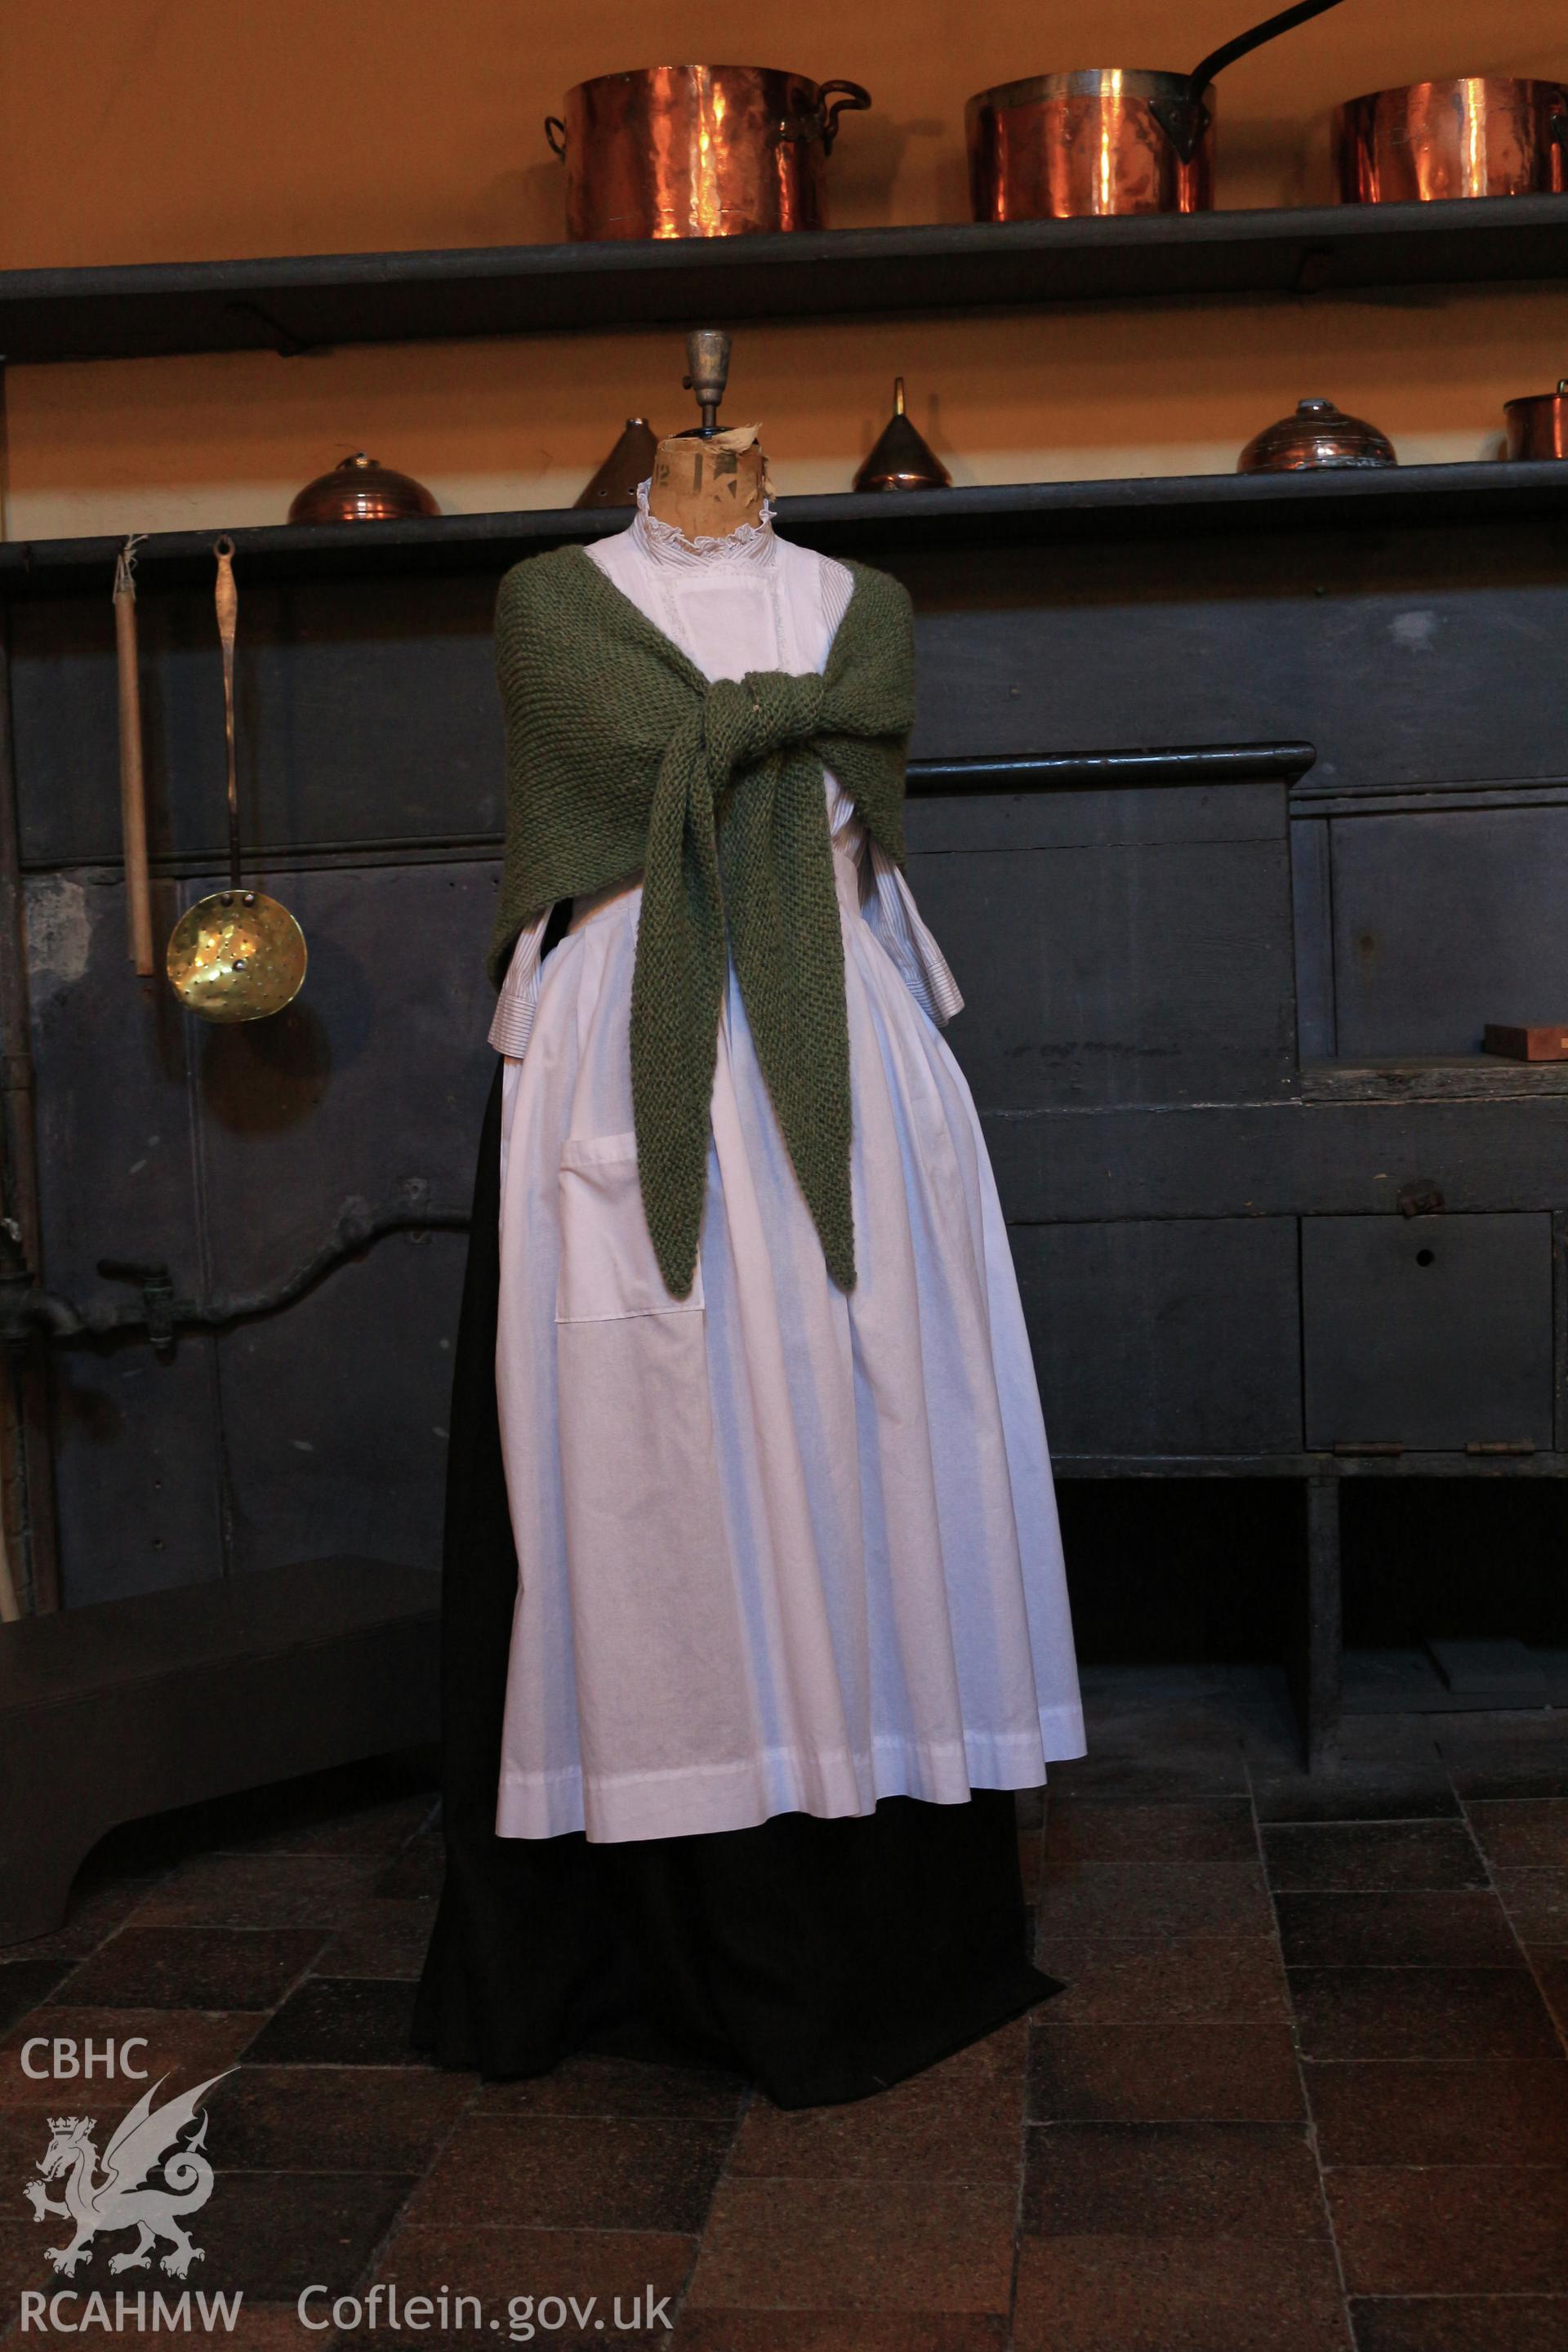 Photographic survey of Penrhyn Castle, Bangor. Kitchens, display of a reconstruction of housekeeper's typical dress.